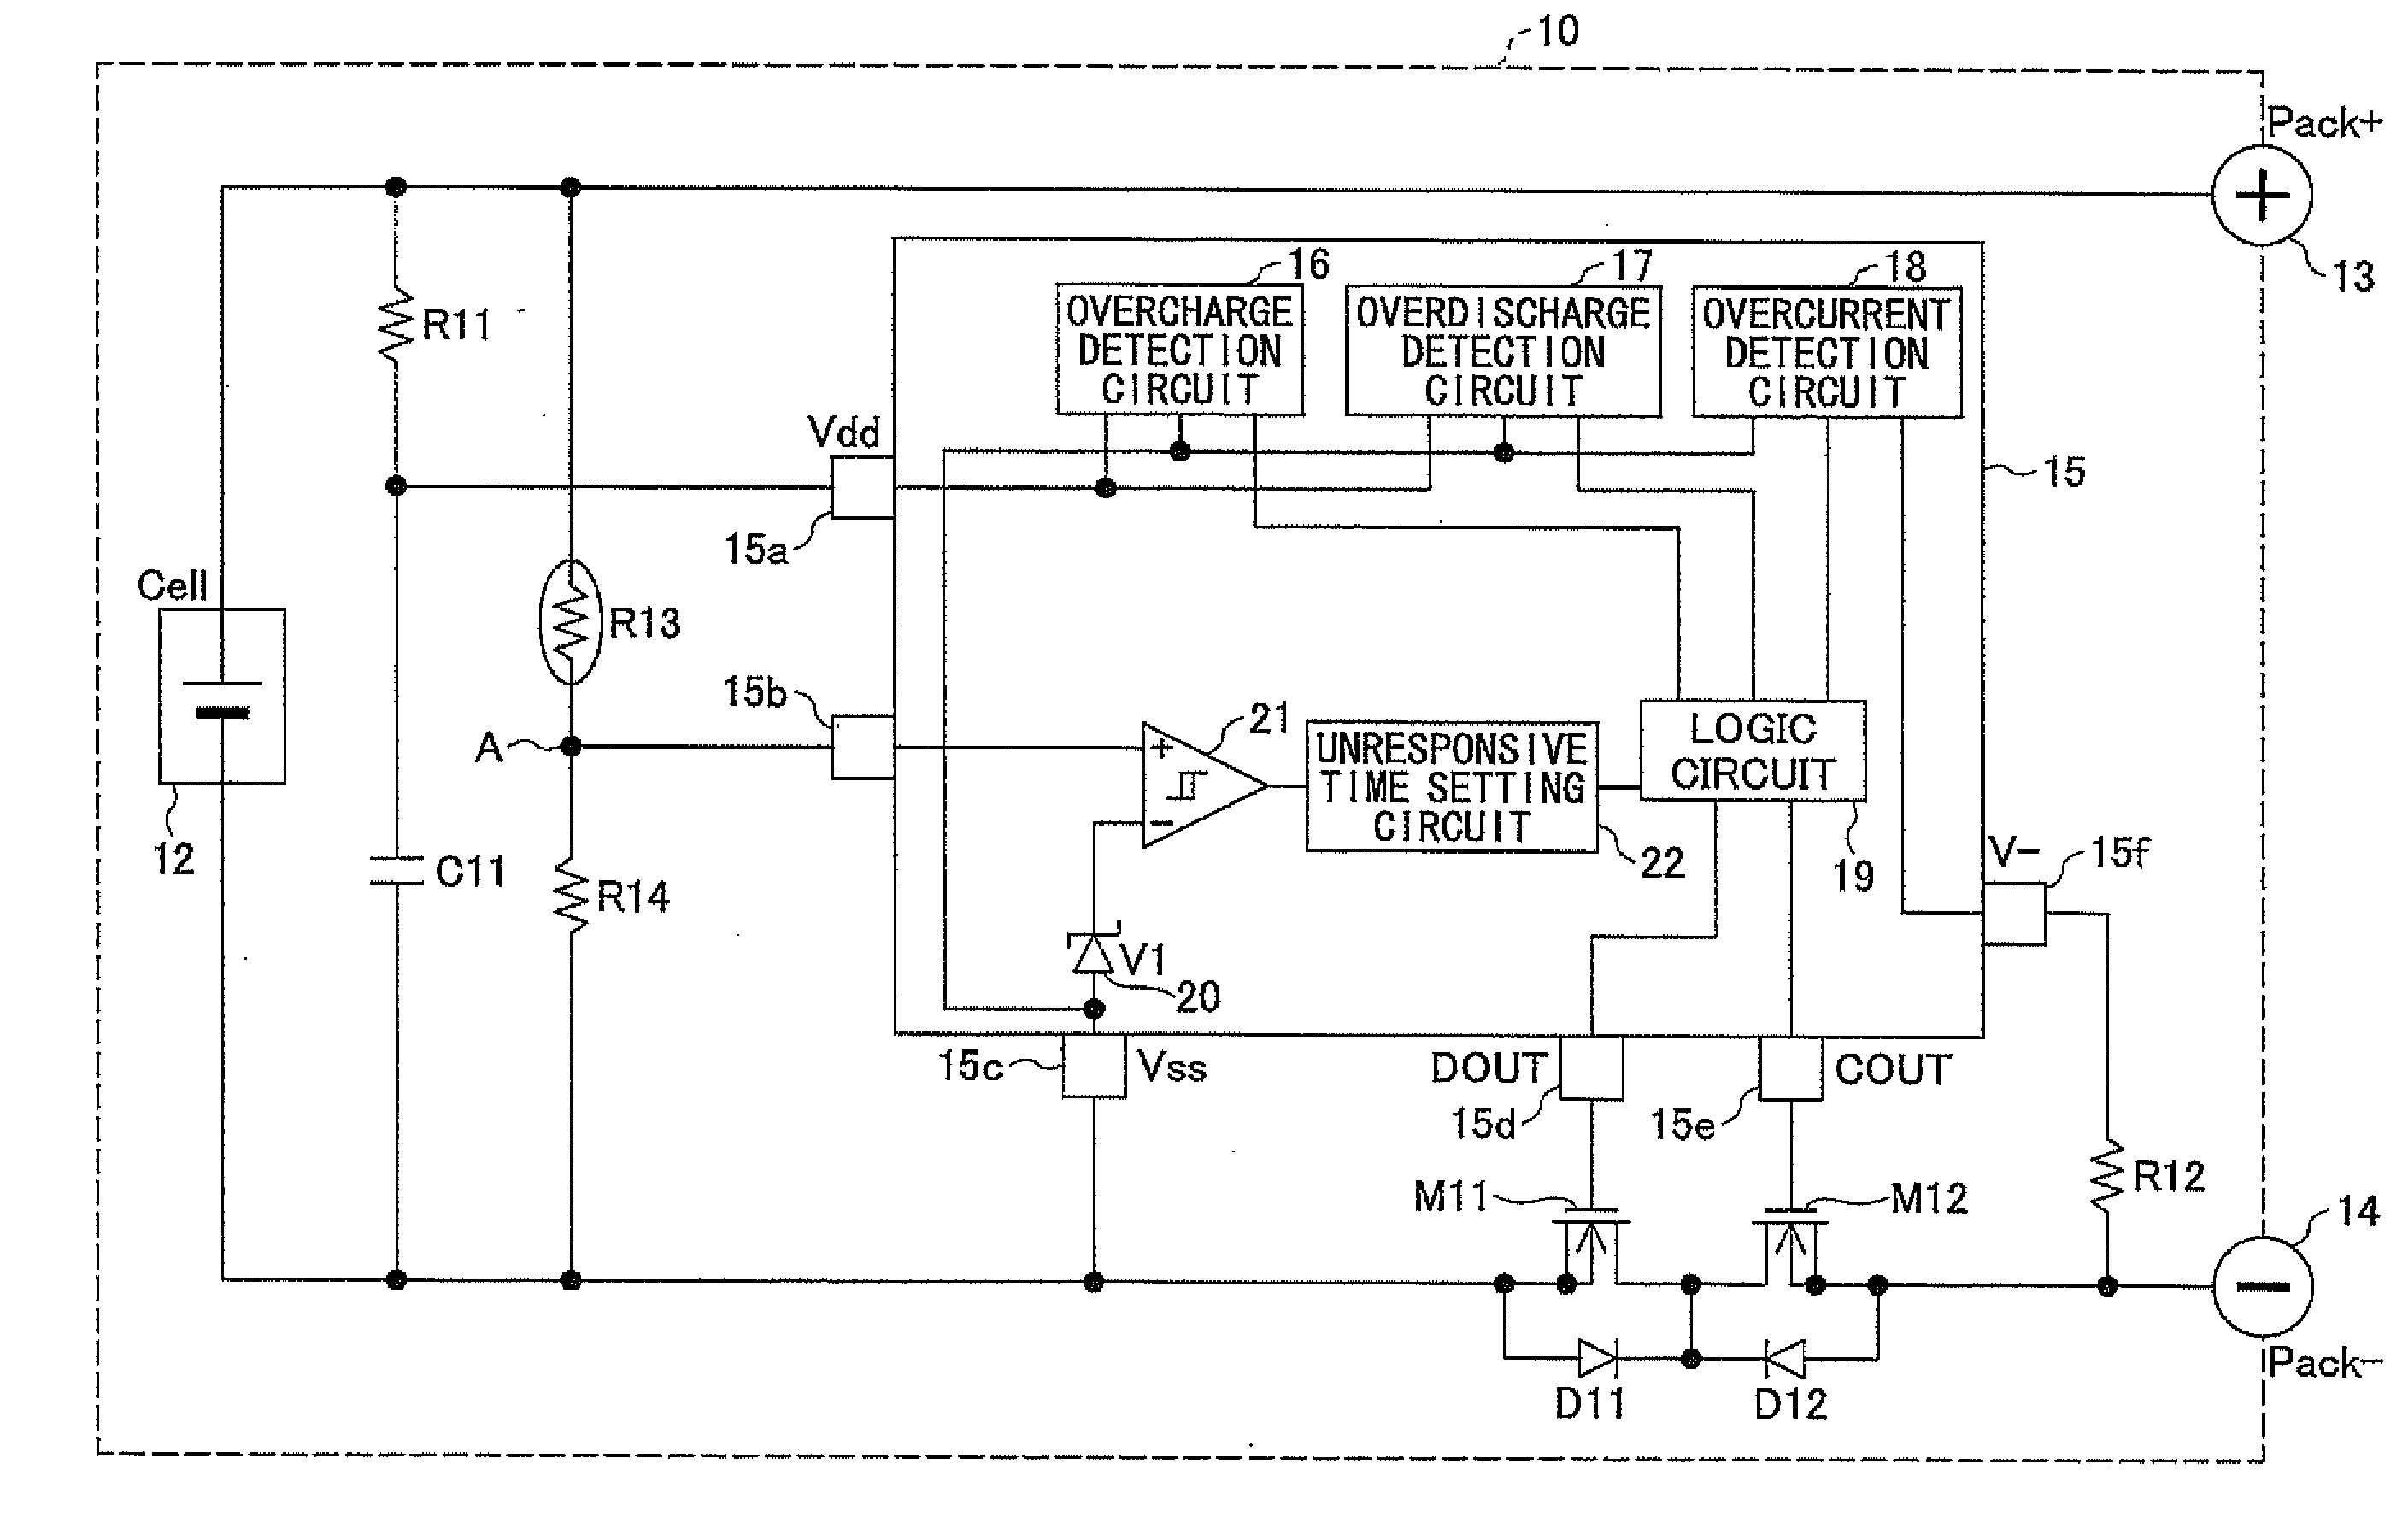 Battery Pack Having Protection Circuit for Secondary Battery